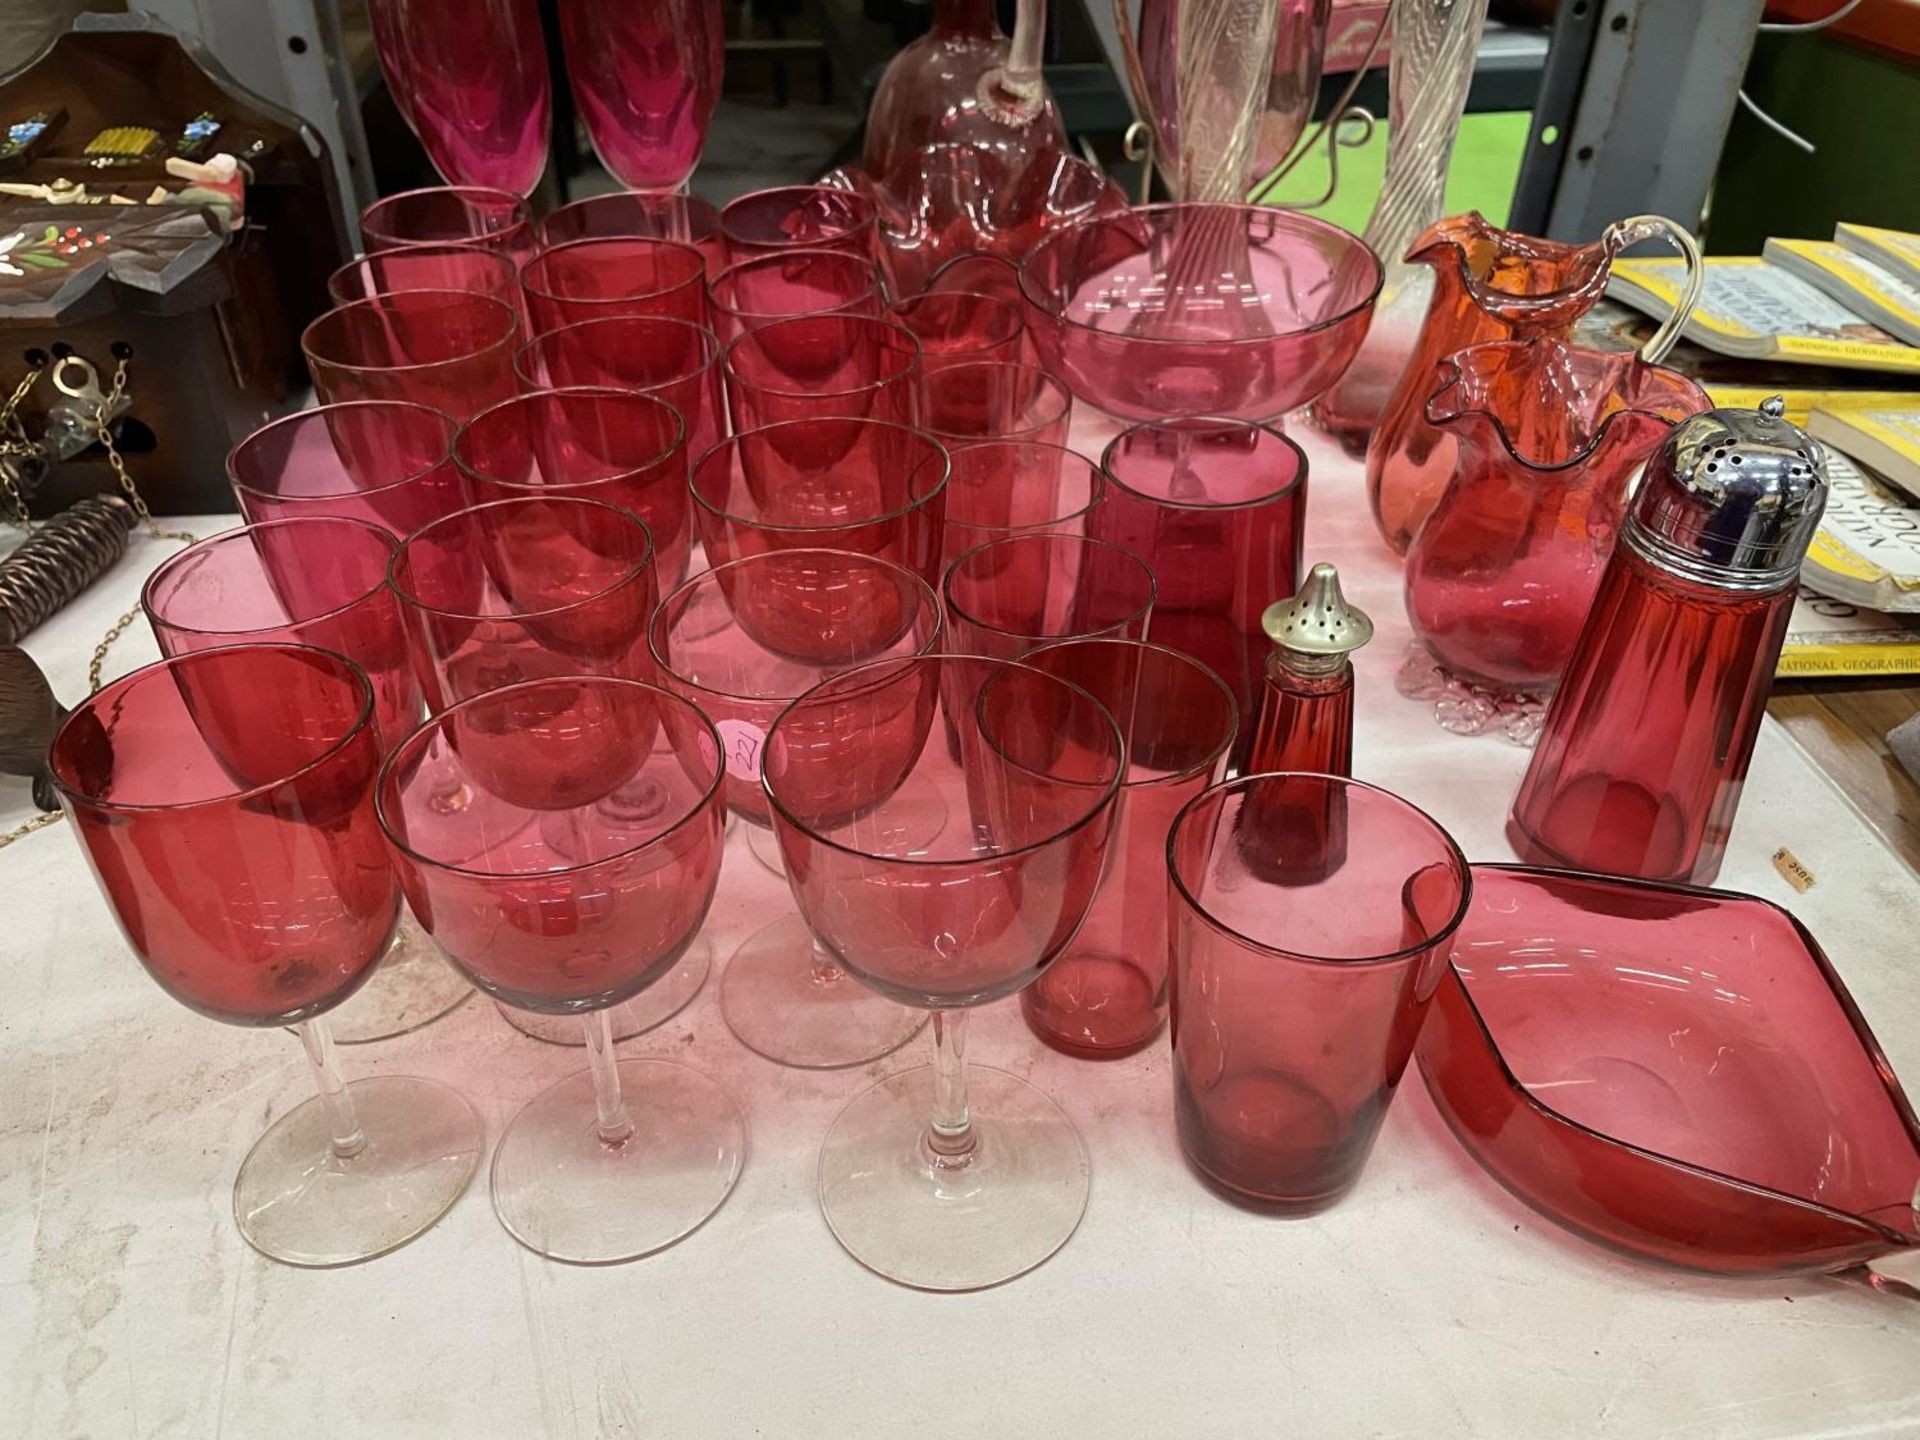 A LARGE QUANTITY OF CRANBERRY GLASS TO INCLUDE DRINKING GLASSES, VASES, JUGS, DECANTER, ETC., - Image 2 of 4